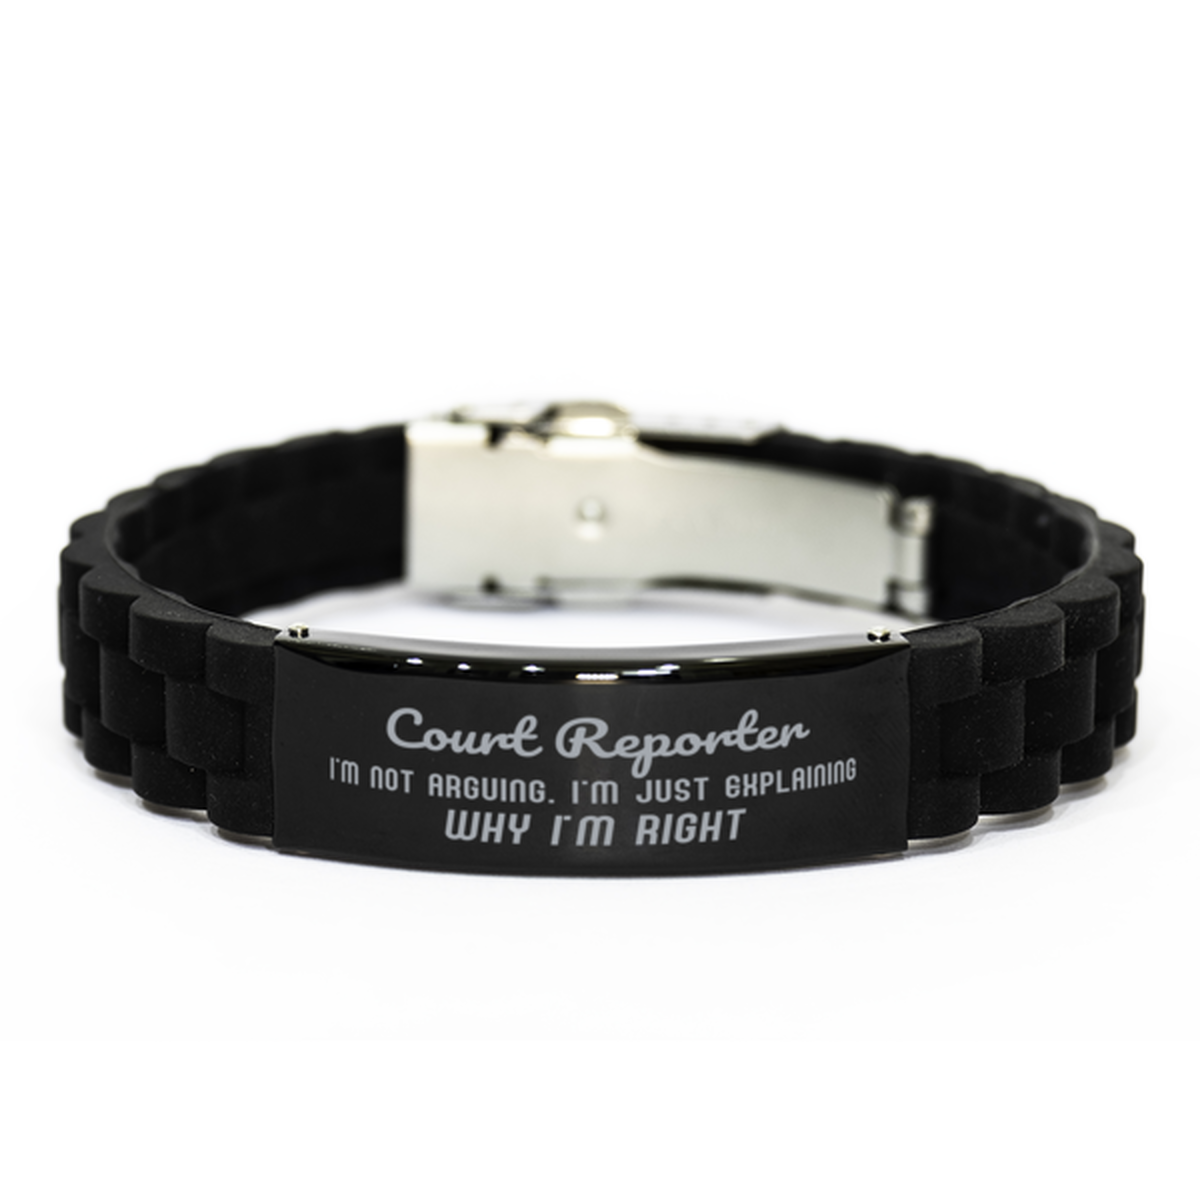 Court Reporter I'm not Arguing. I'm Just Explaining Why I'm RIGHT Black Glidelock Clasp Bracelet, Funny Saying Quote Court Reporter Gifts For Court Reporter Graduation Birthday Christmas Gifts for Men Women Coworker